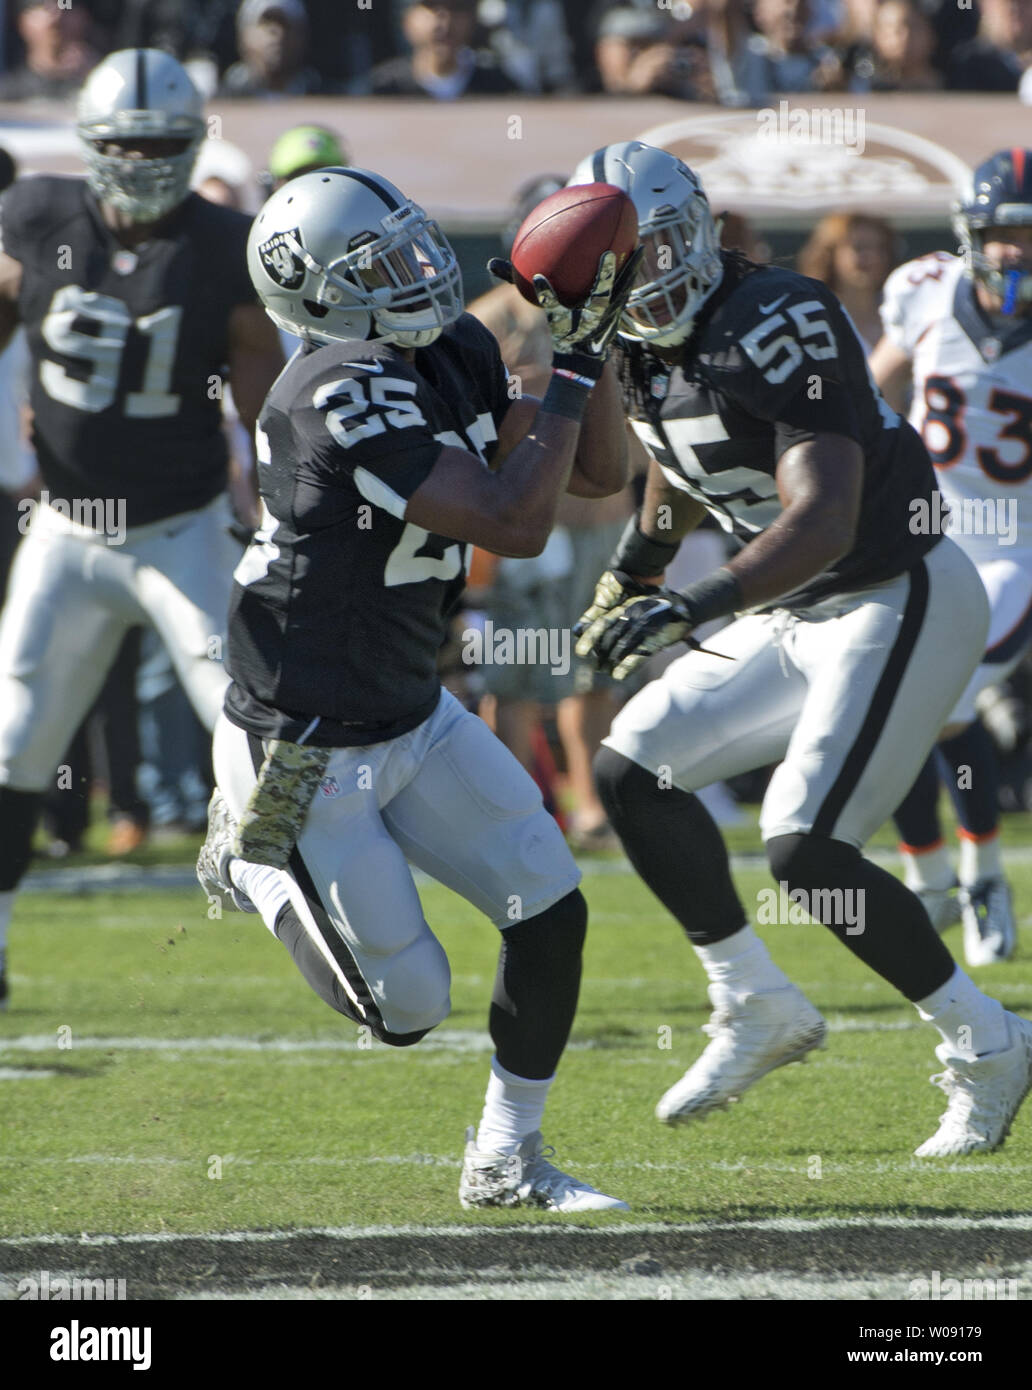 Oakland Raiders DJ Hayden (25) intercepts a Denver Broncos Peyton Manning pass in the first quarter at O.co Coliseum in Oakland, California on November 9, 2014. The Broncos defeated the winless Raiders 41-17.     UPI/Terry Schmitt Stock Photo